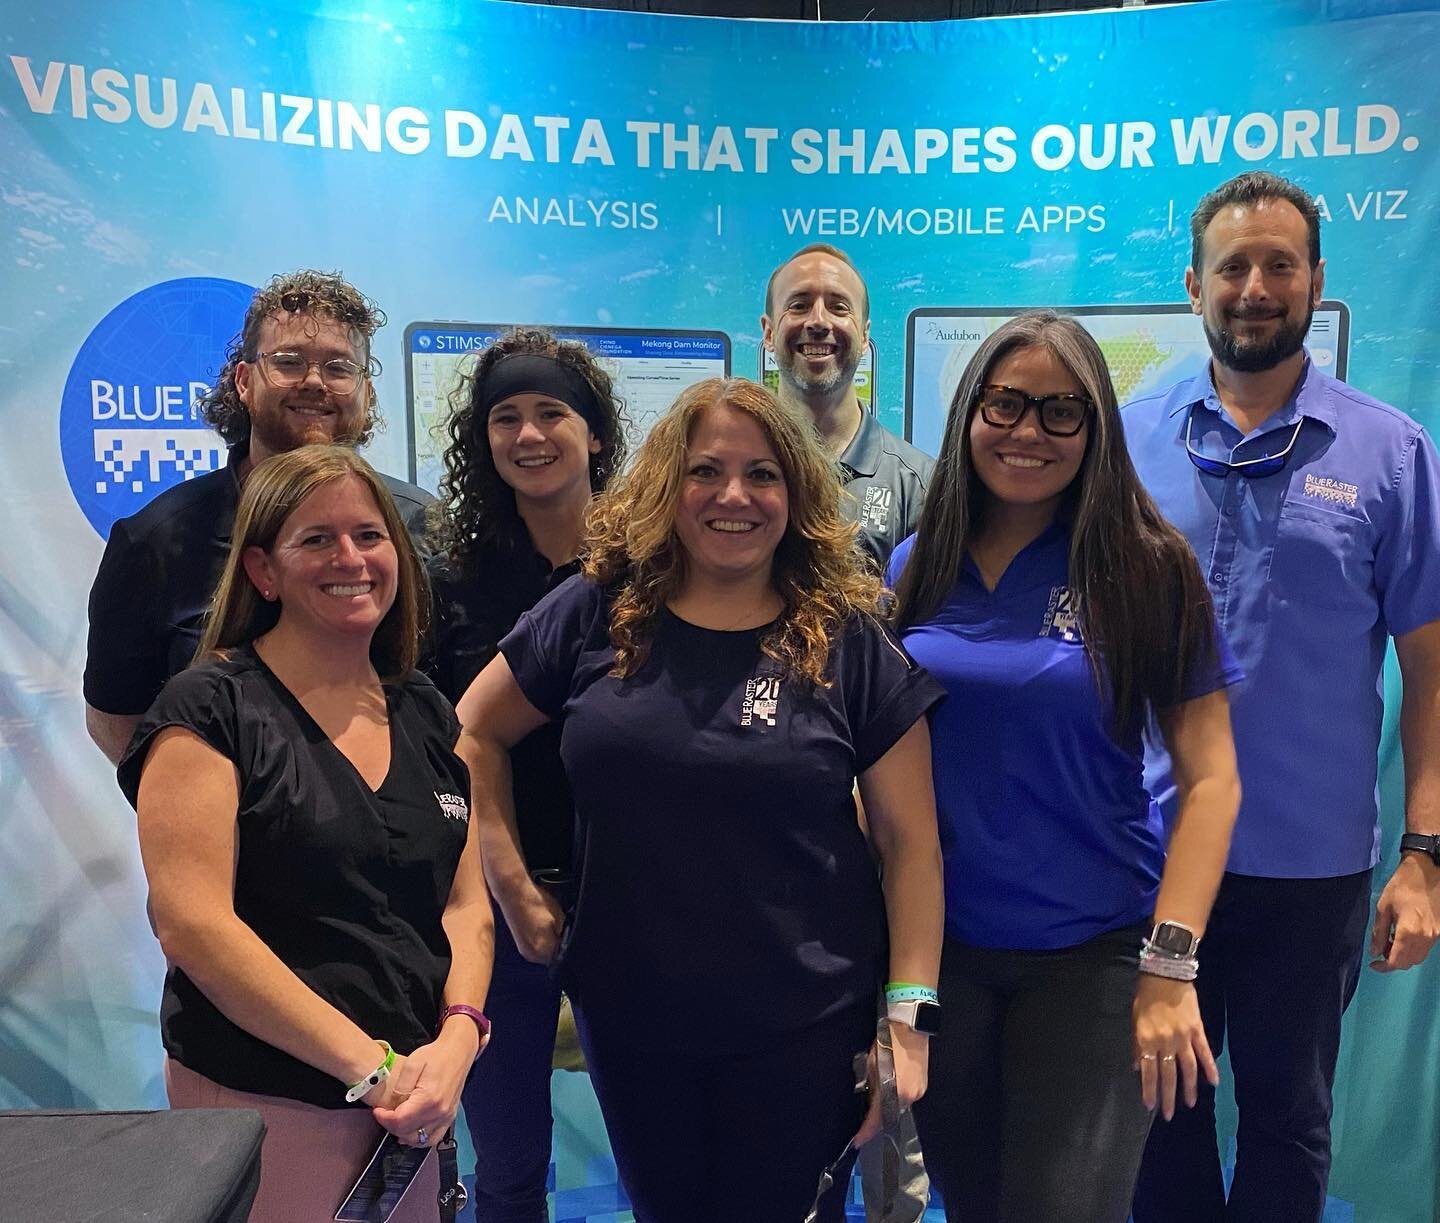 It was so much fun to meet up with our GIS colleagues, clients, and friends again at the Esri User Conference in San Diego! 

Thanks to everyone that stopped by our booth and talked about the latest and greatest ways that ArcGIS is helping to solve t